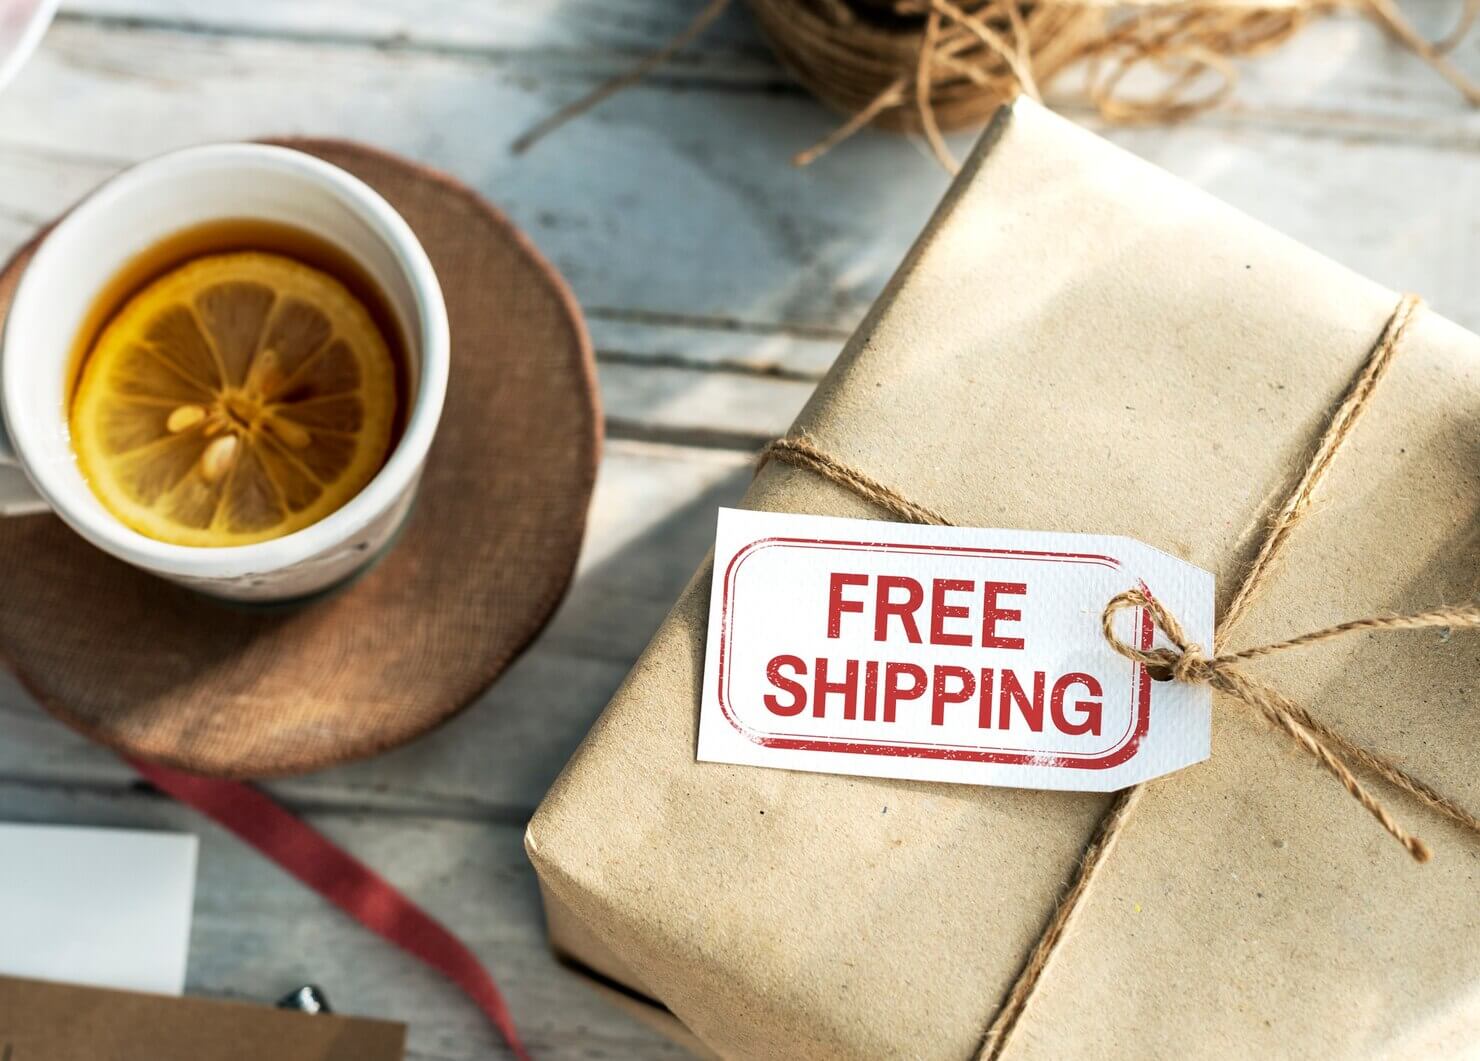 Free shipping delivery service for online ordered products